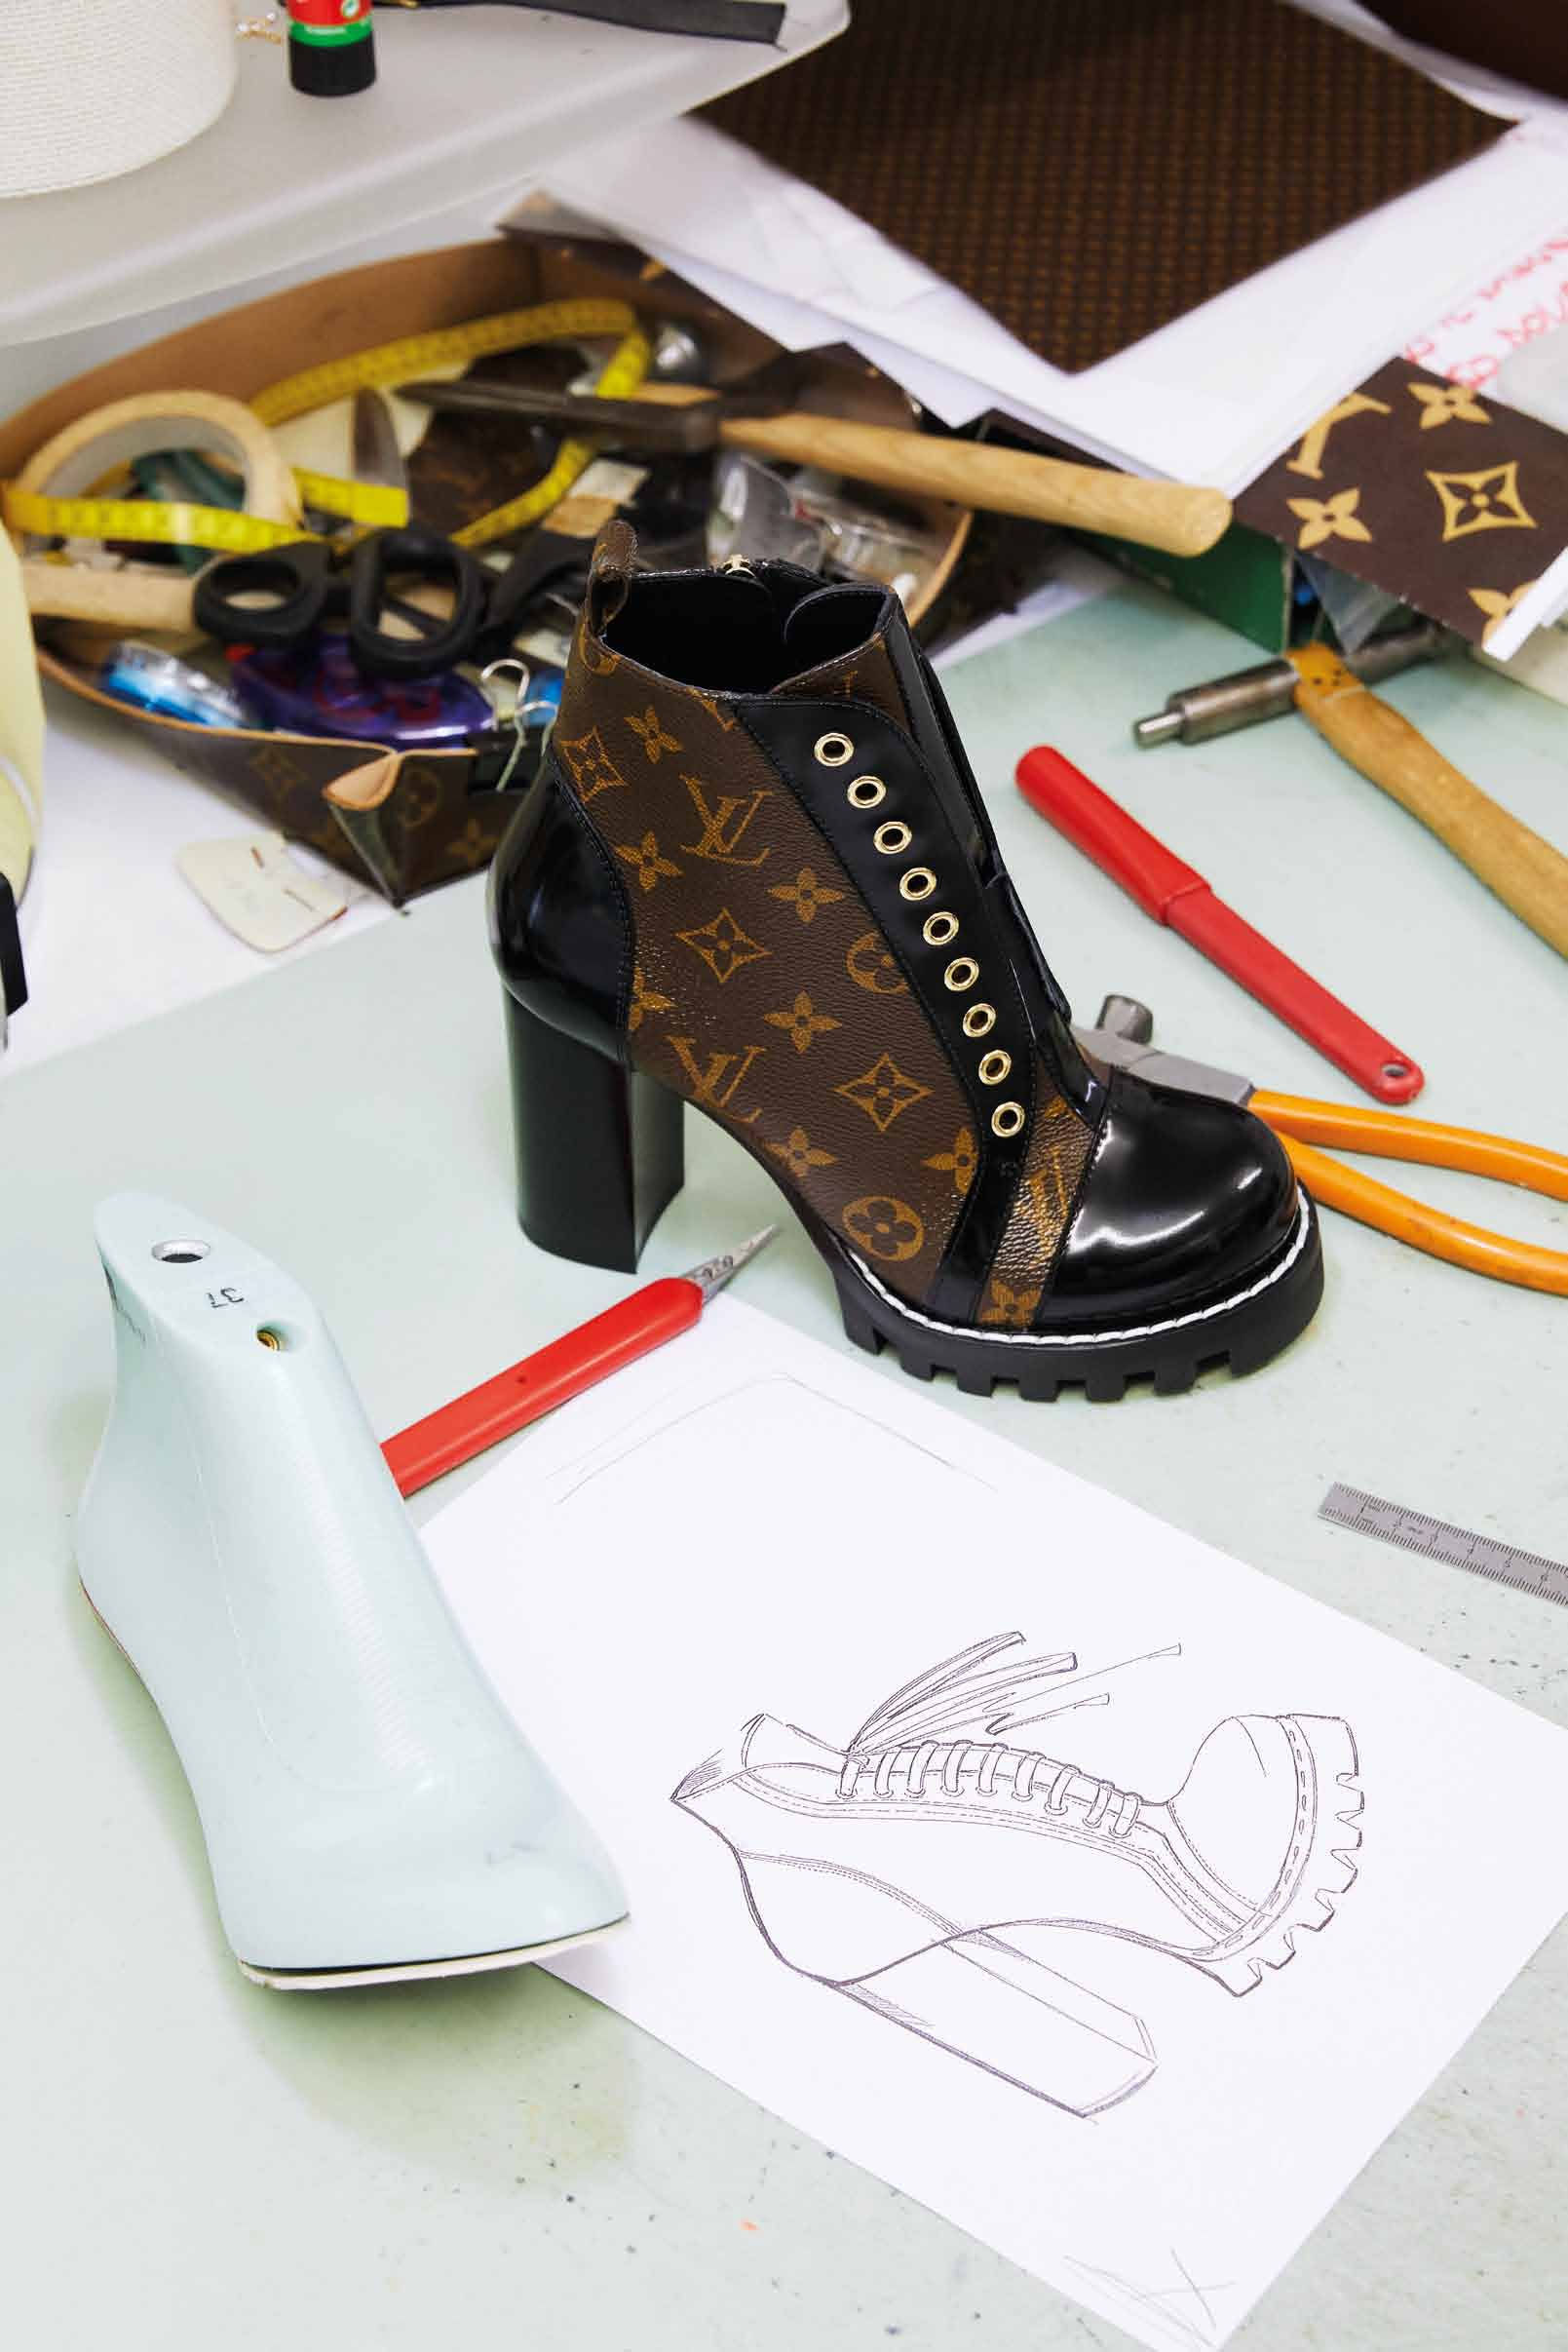 Louis Vuitton's artistic sneakers, combining art with manufacturing  expertise - Italian Shoes